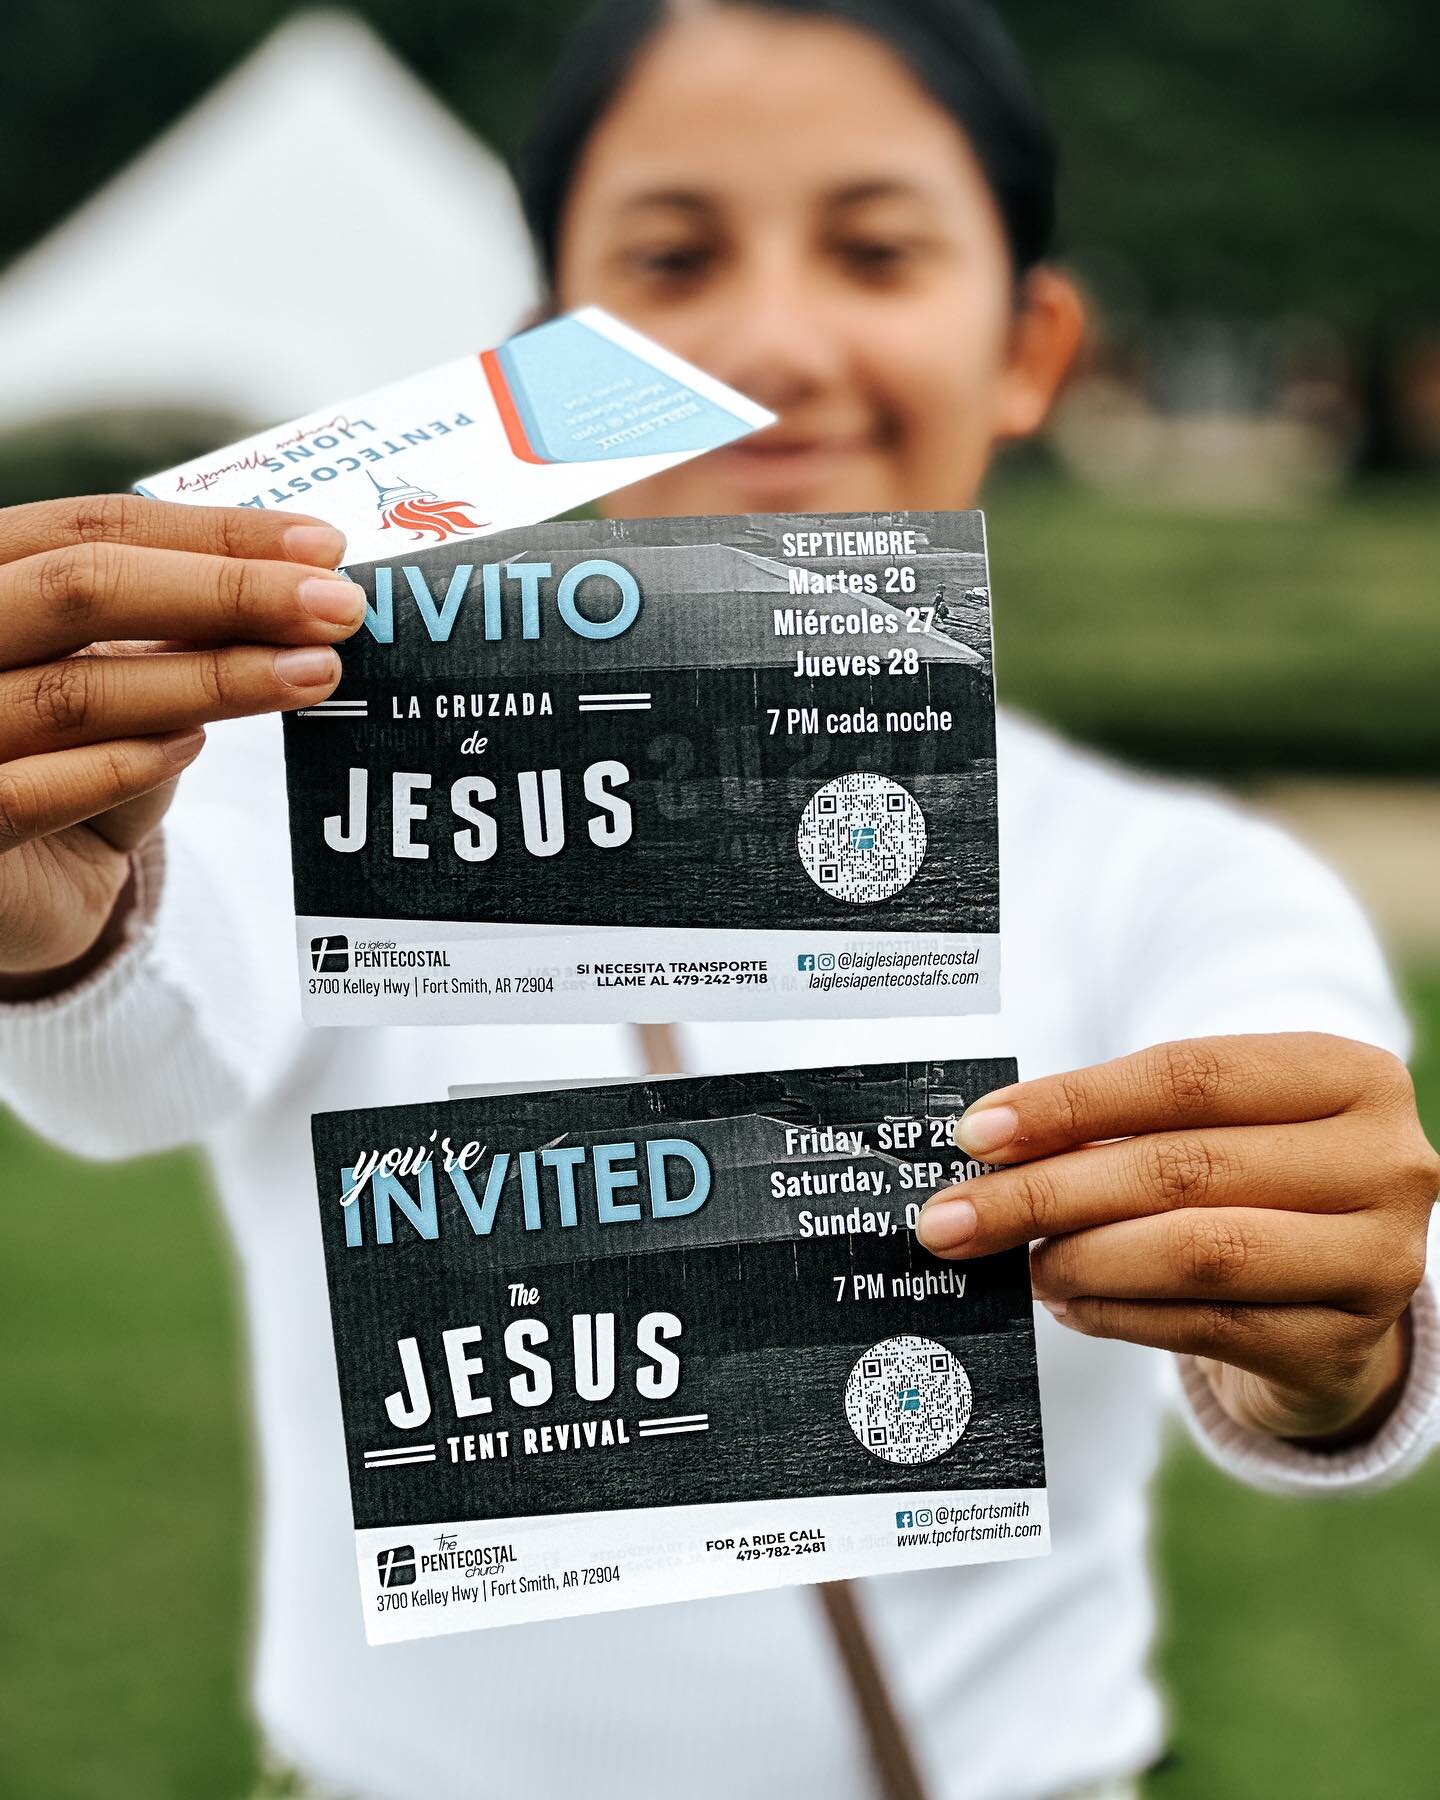 🔥 JESUS TENT REVIVAL 🔥 

Come one, Come all - You&rsquo;re invited to the Jesus Tent Revival! Come expecting God to do miraculous things! 

ESPA&Ntilde;OL: 
Martes : Sept 26th 
Mi&eacute;rcoles : Sept 27th 
Jueves : Sept 28th 

ENGLISH: 
Friday : S